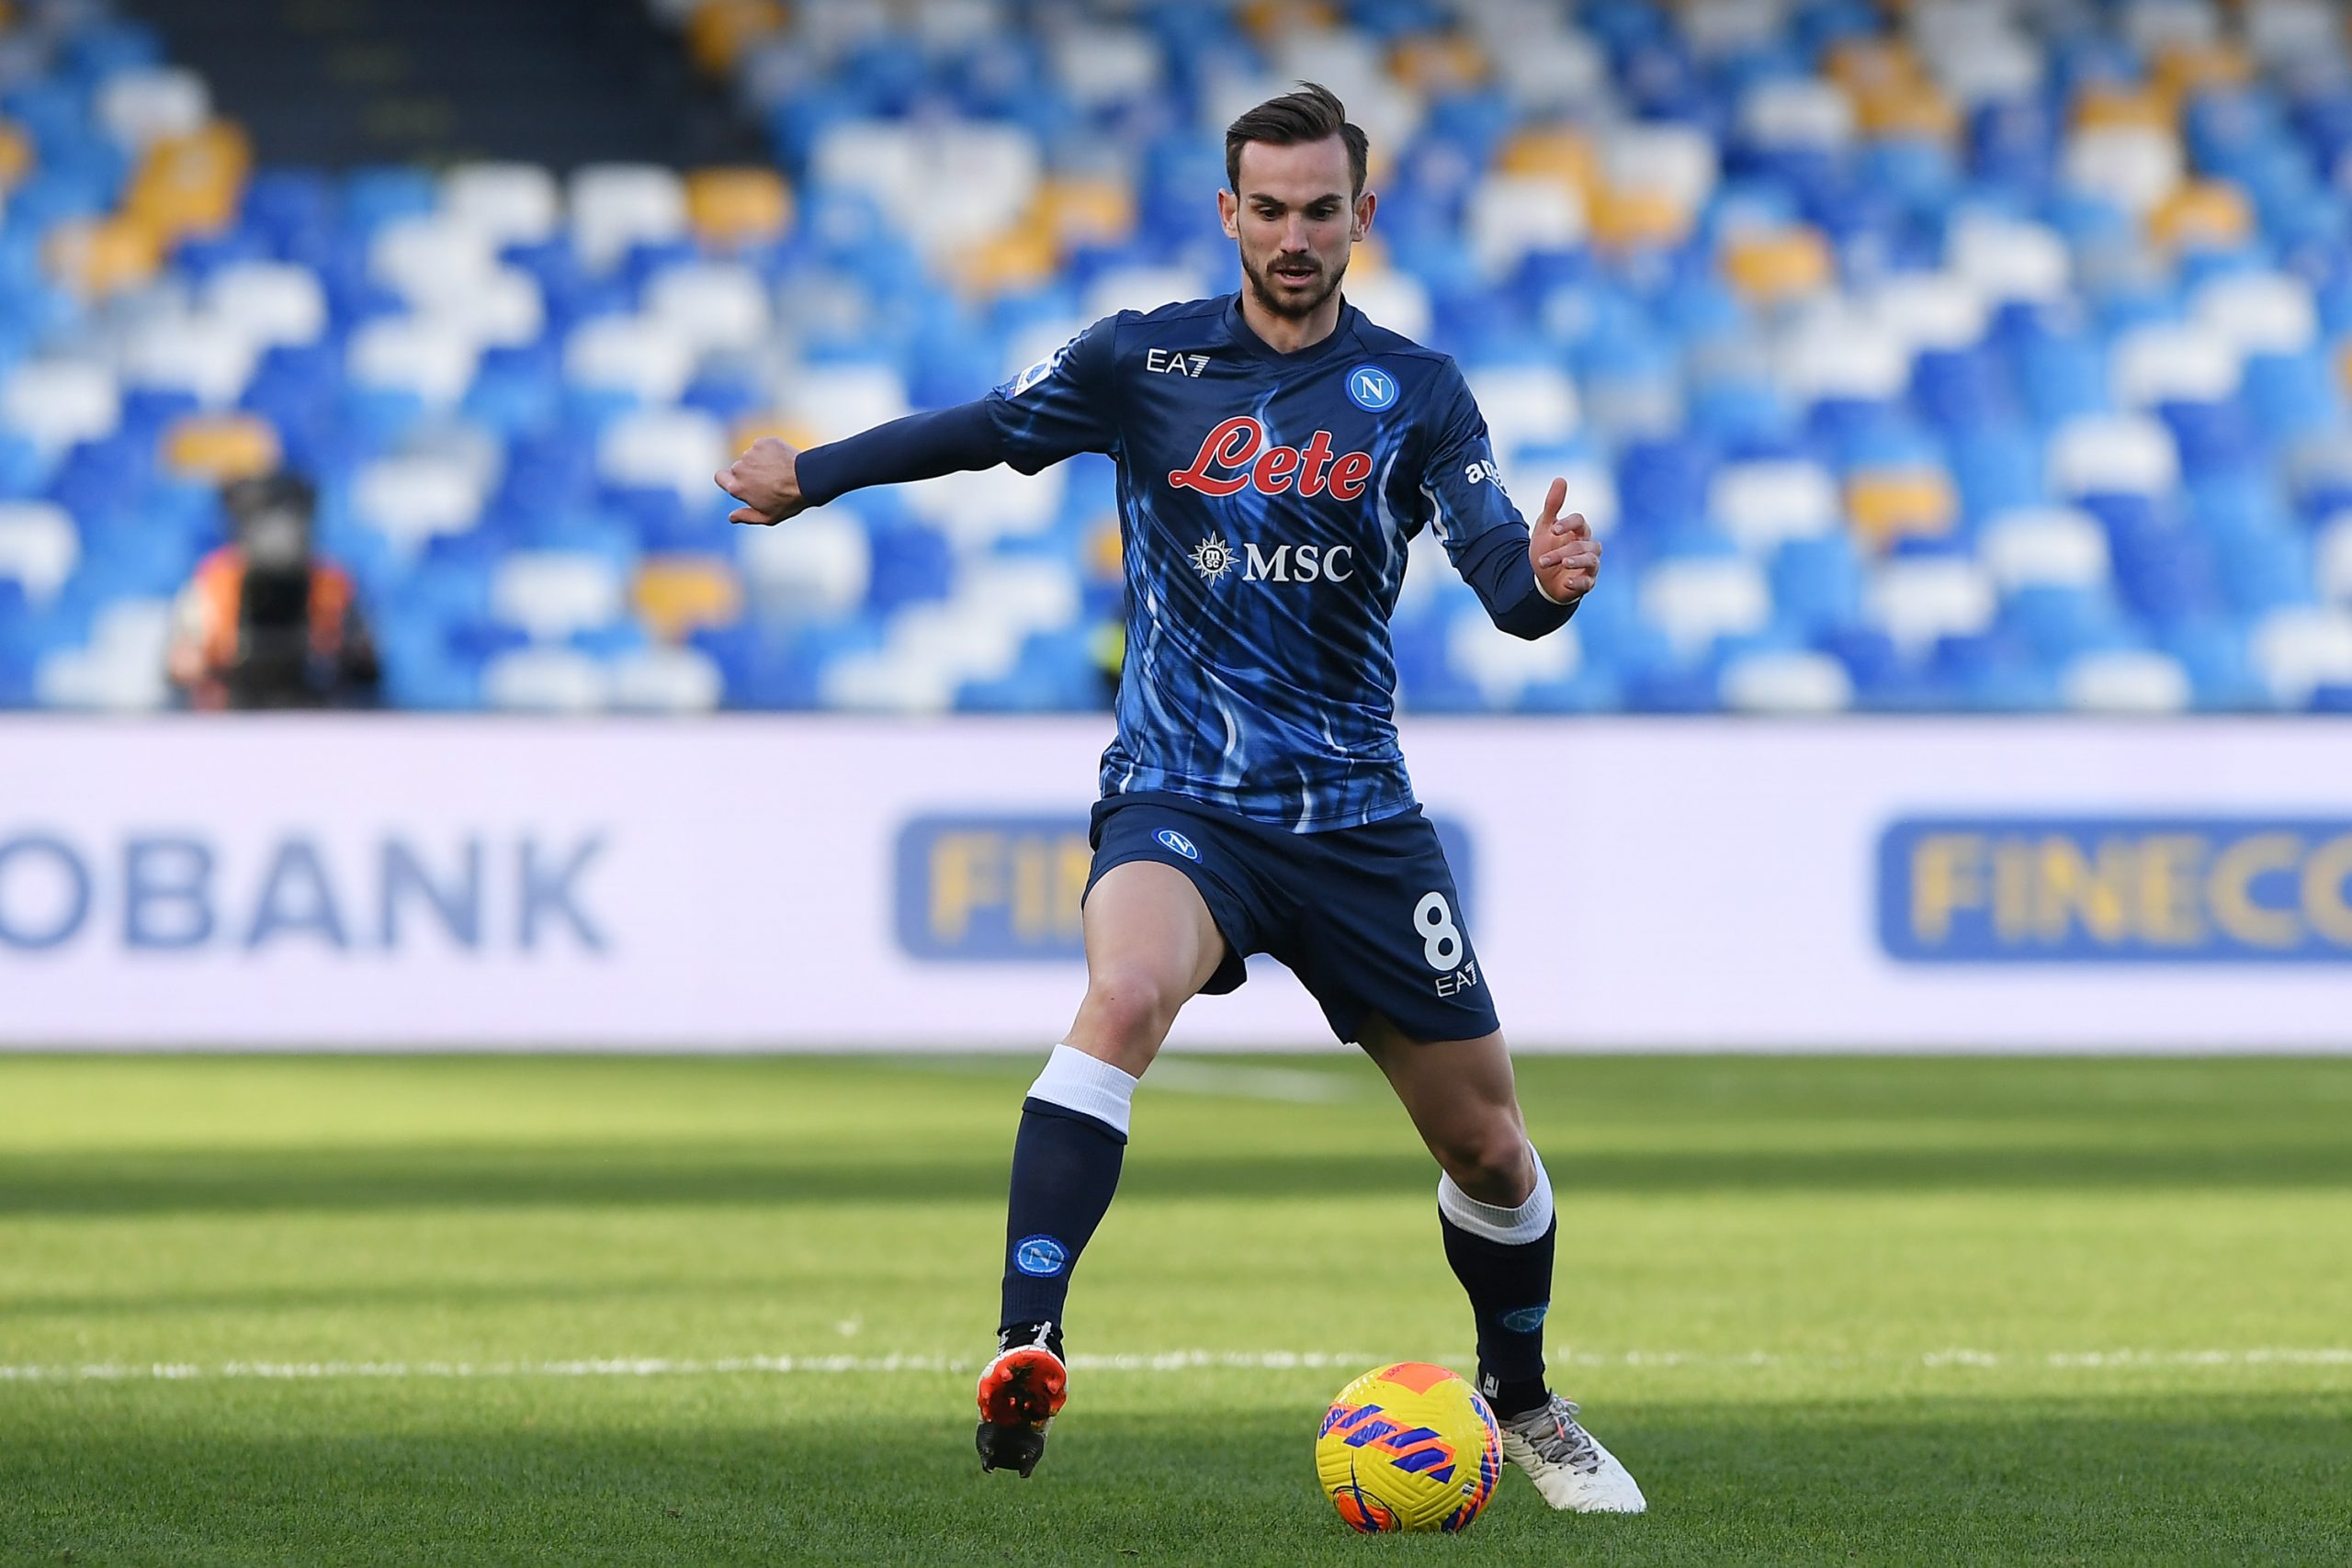 Napoli are willing to part ways with Fabian Ruiz this summer.